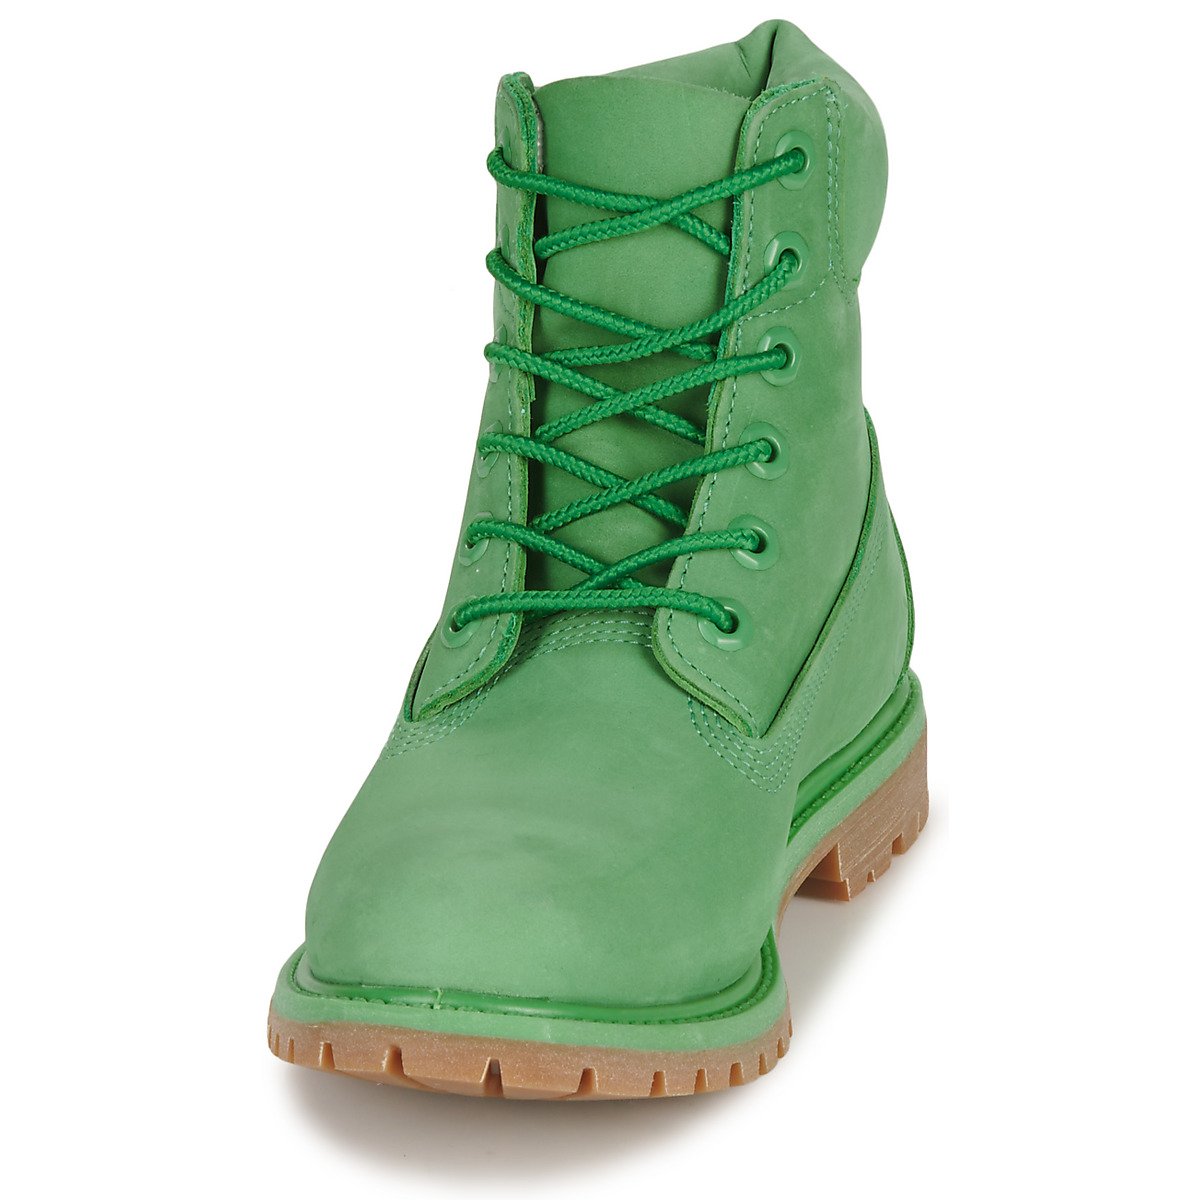 Mid Boots 6 "Green"